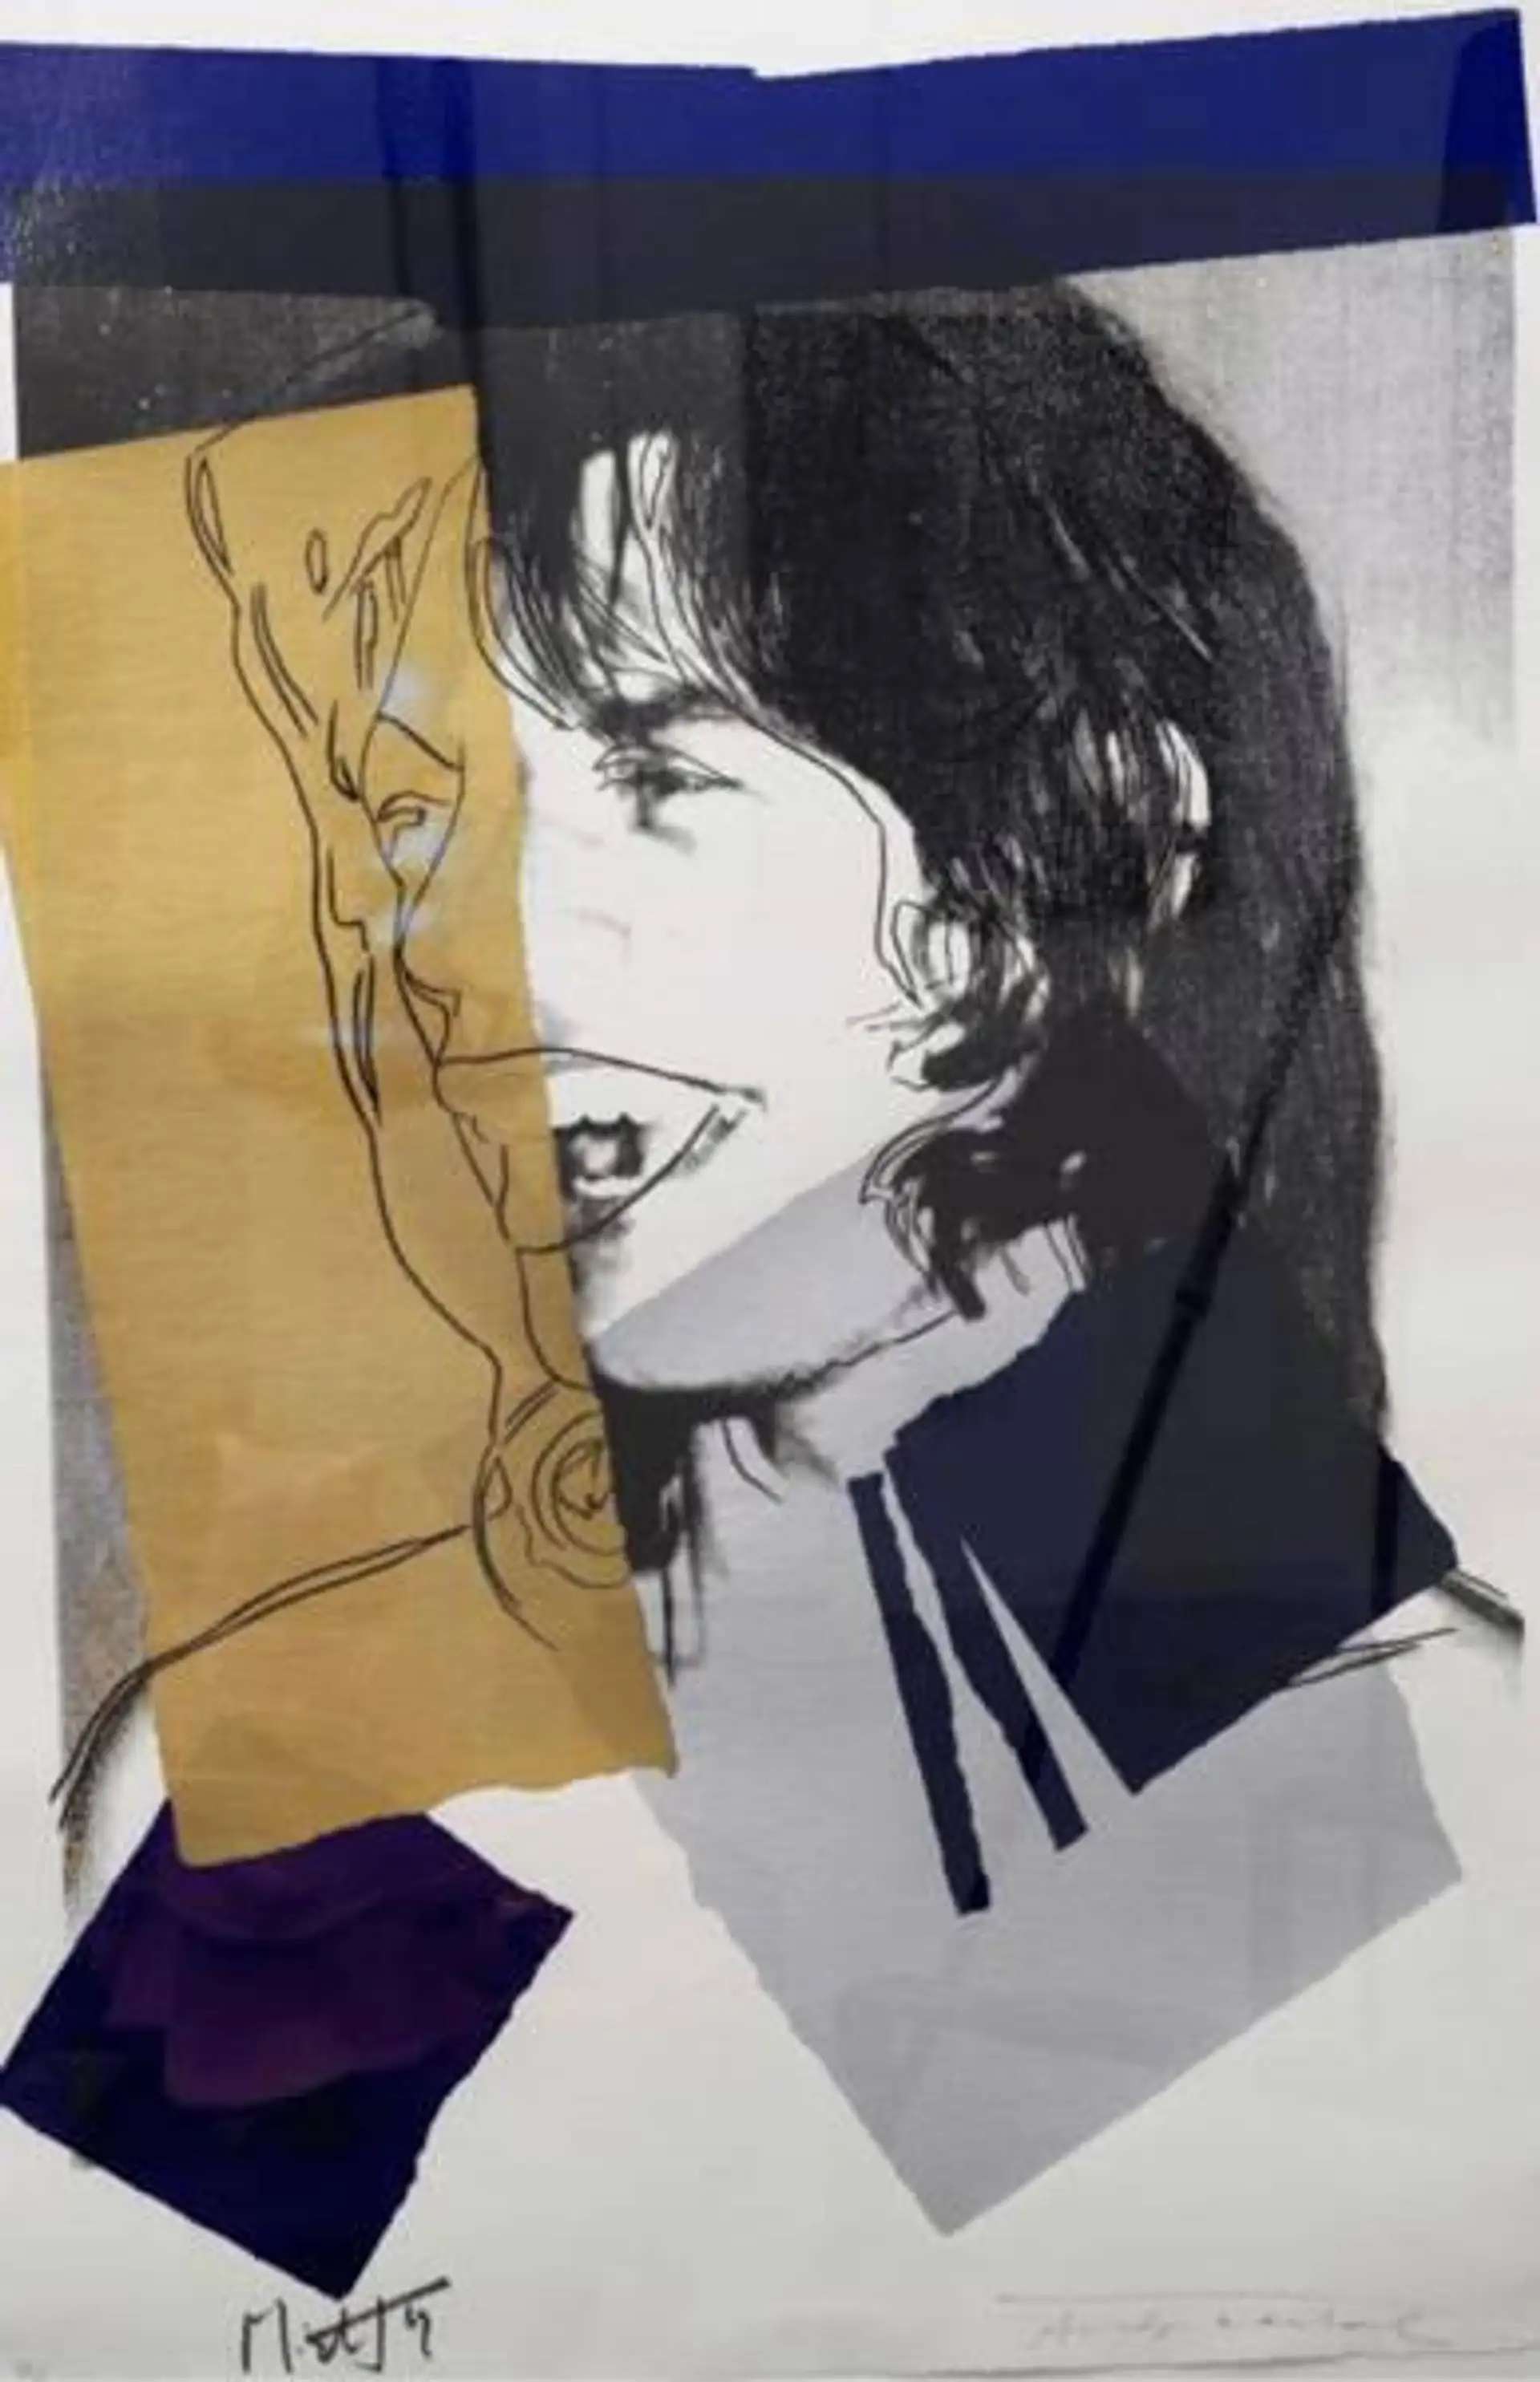 A screenprint by Andy Warhol depicting Mick Jagger in black ink against a background of collaged colour panels in dark blue, grey, and gold. The print is signed by both Warhol and Jagger at the bottom of the composition.